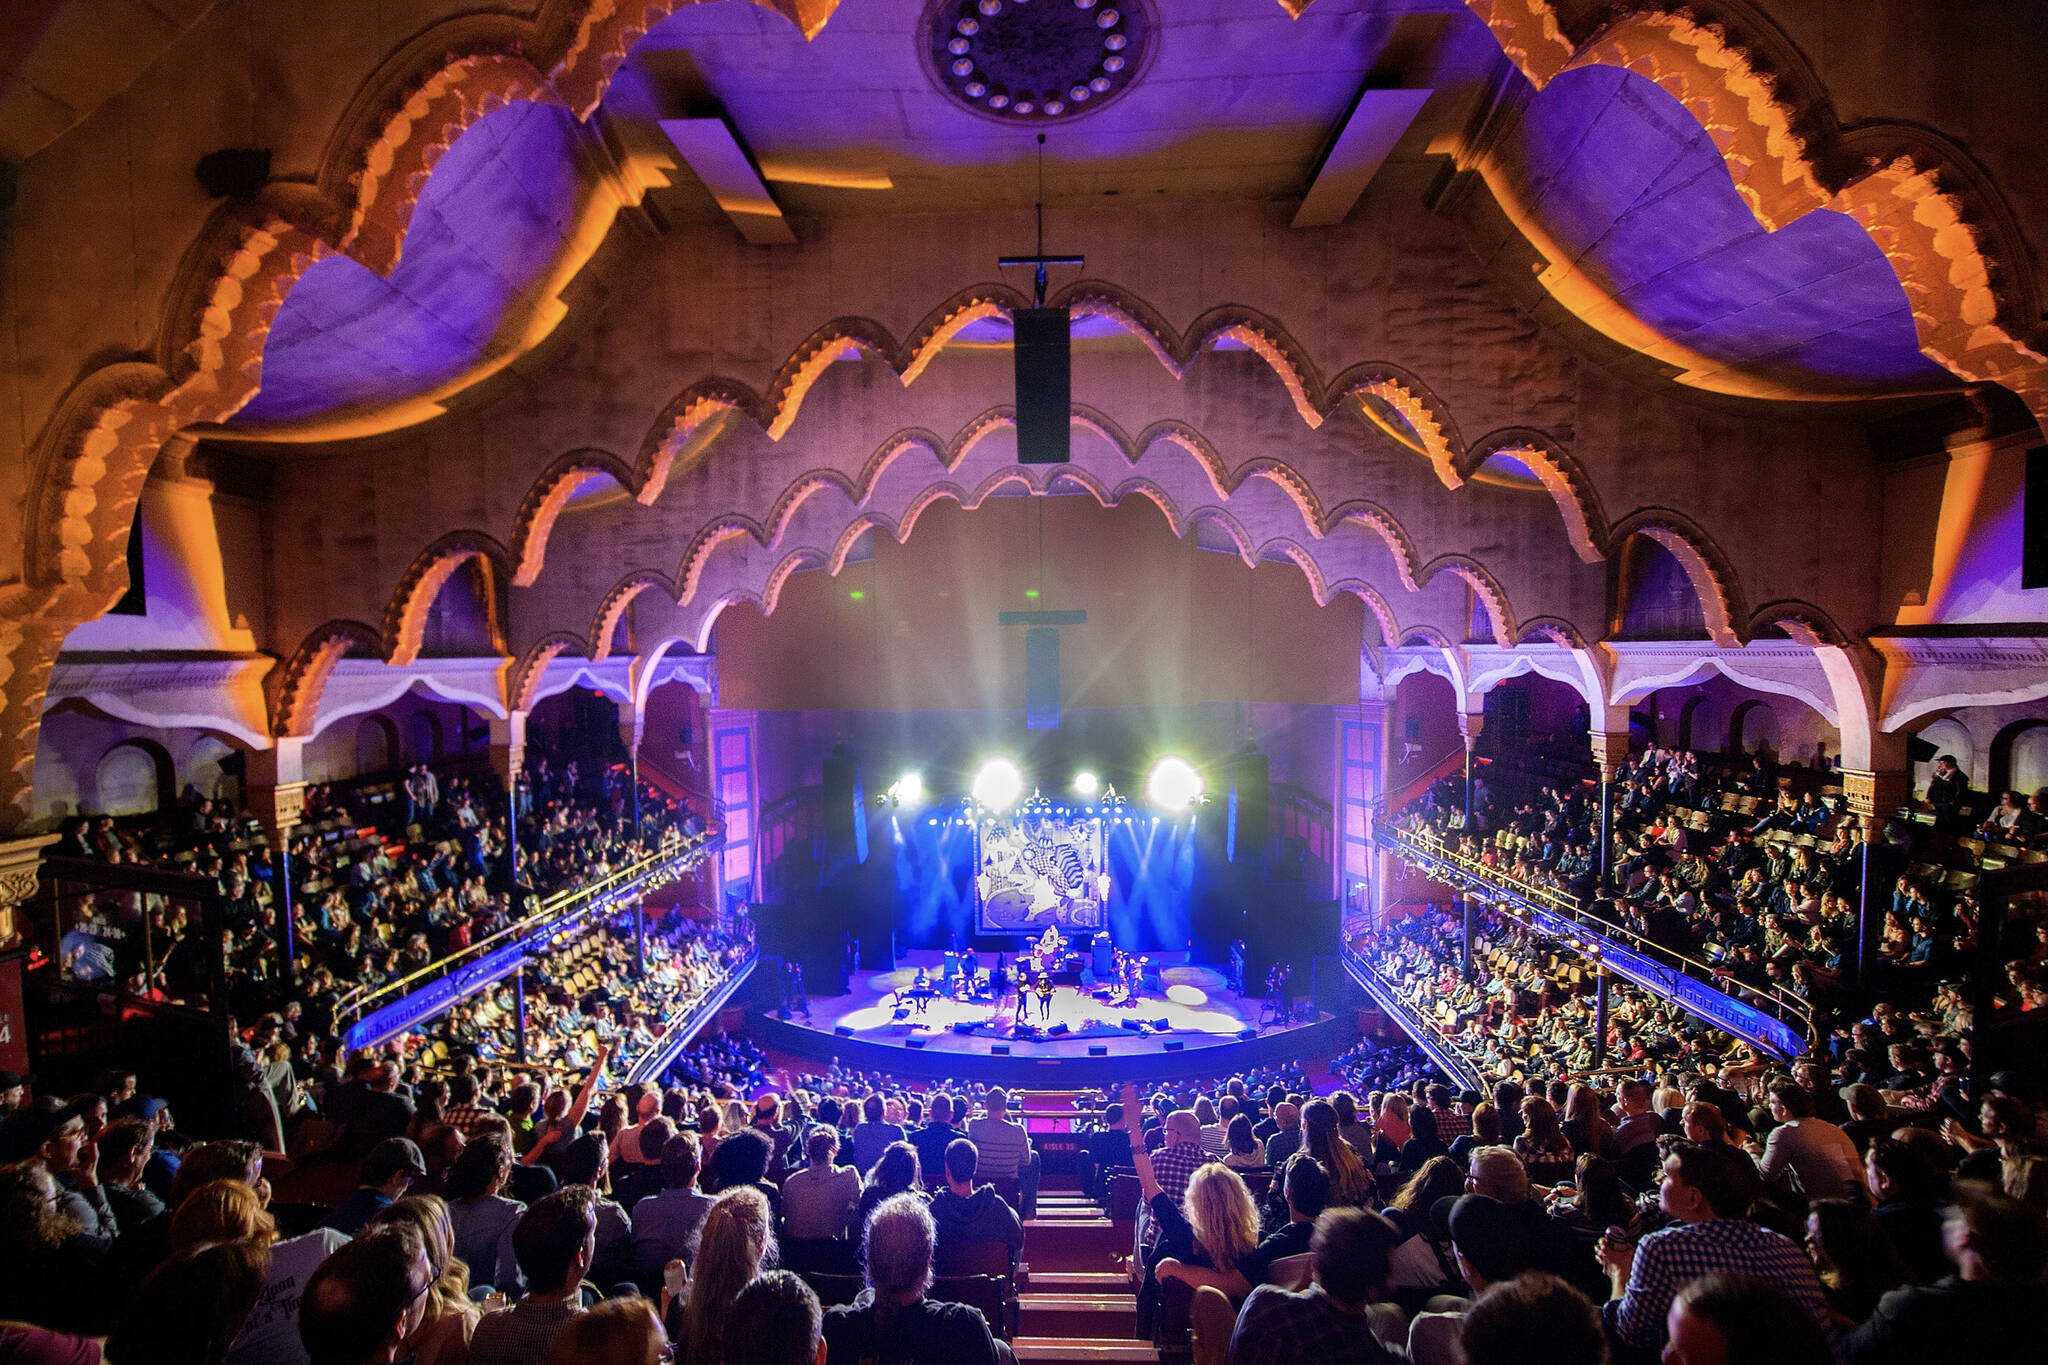 Massey Hall announces its reopening after 3 years and here are what